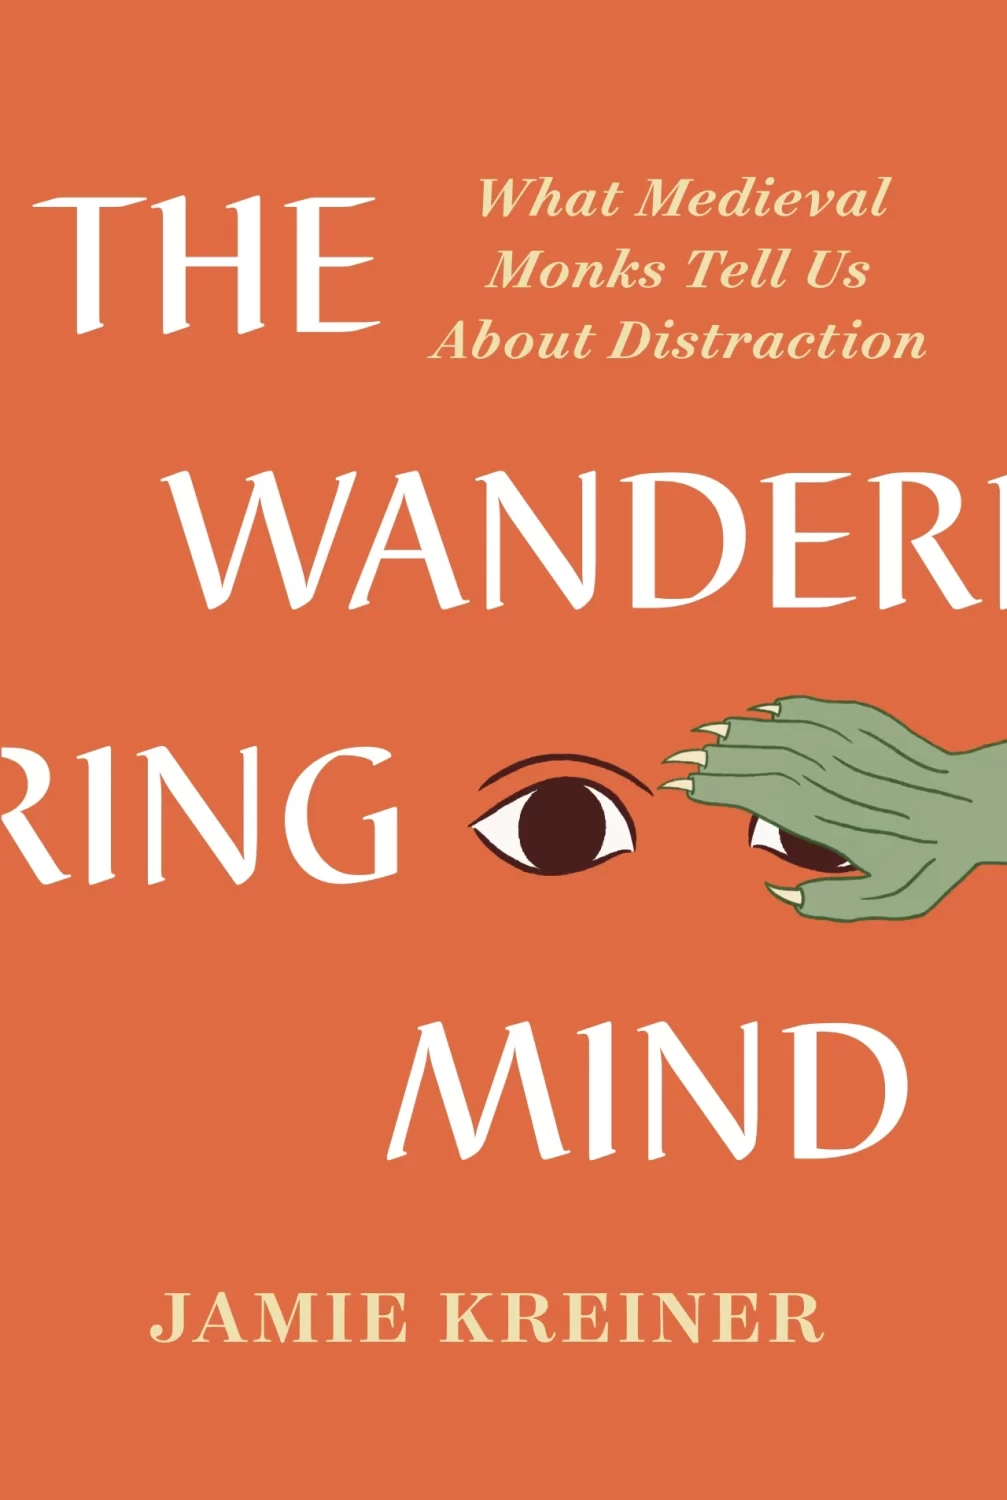 Front jacket of "The Wandering Mind: What Medieval Monks Tell Us About Distraction" by Jamie Kreiner, an orange cover with two wide eyes, one partly covered by a demon-like green paw with sharp nails.